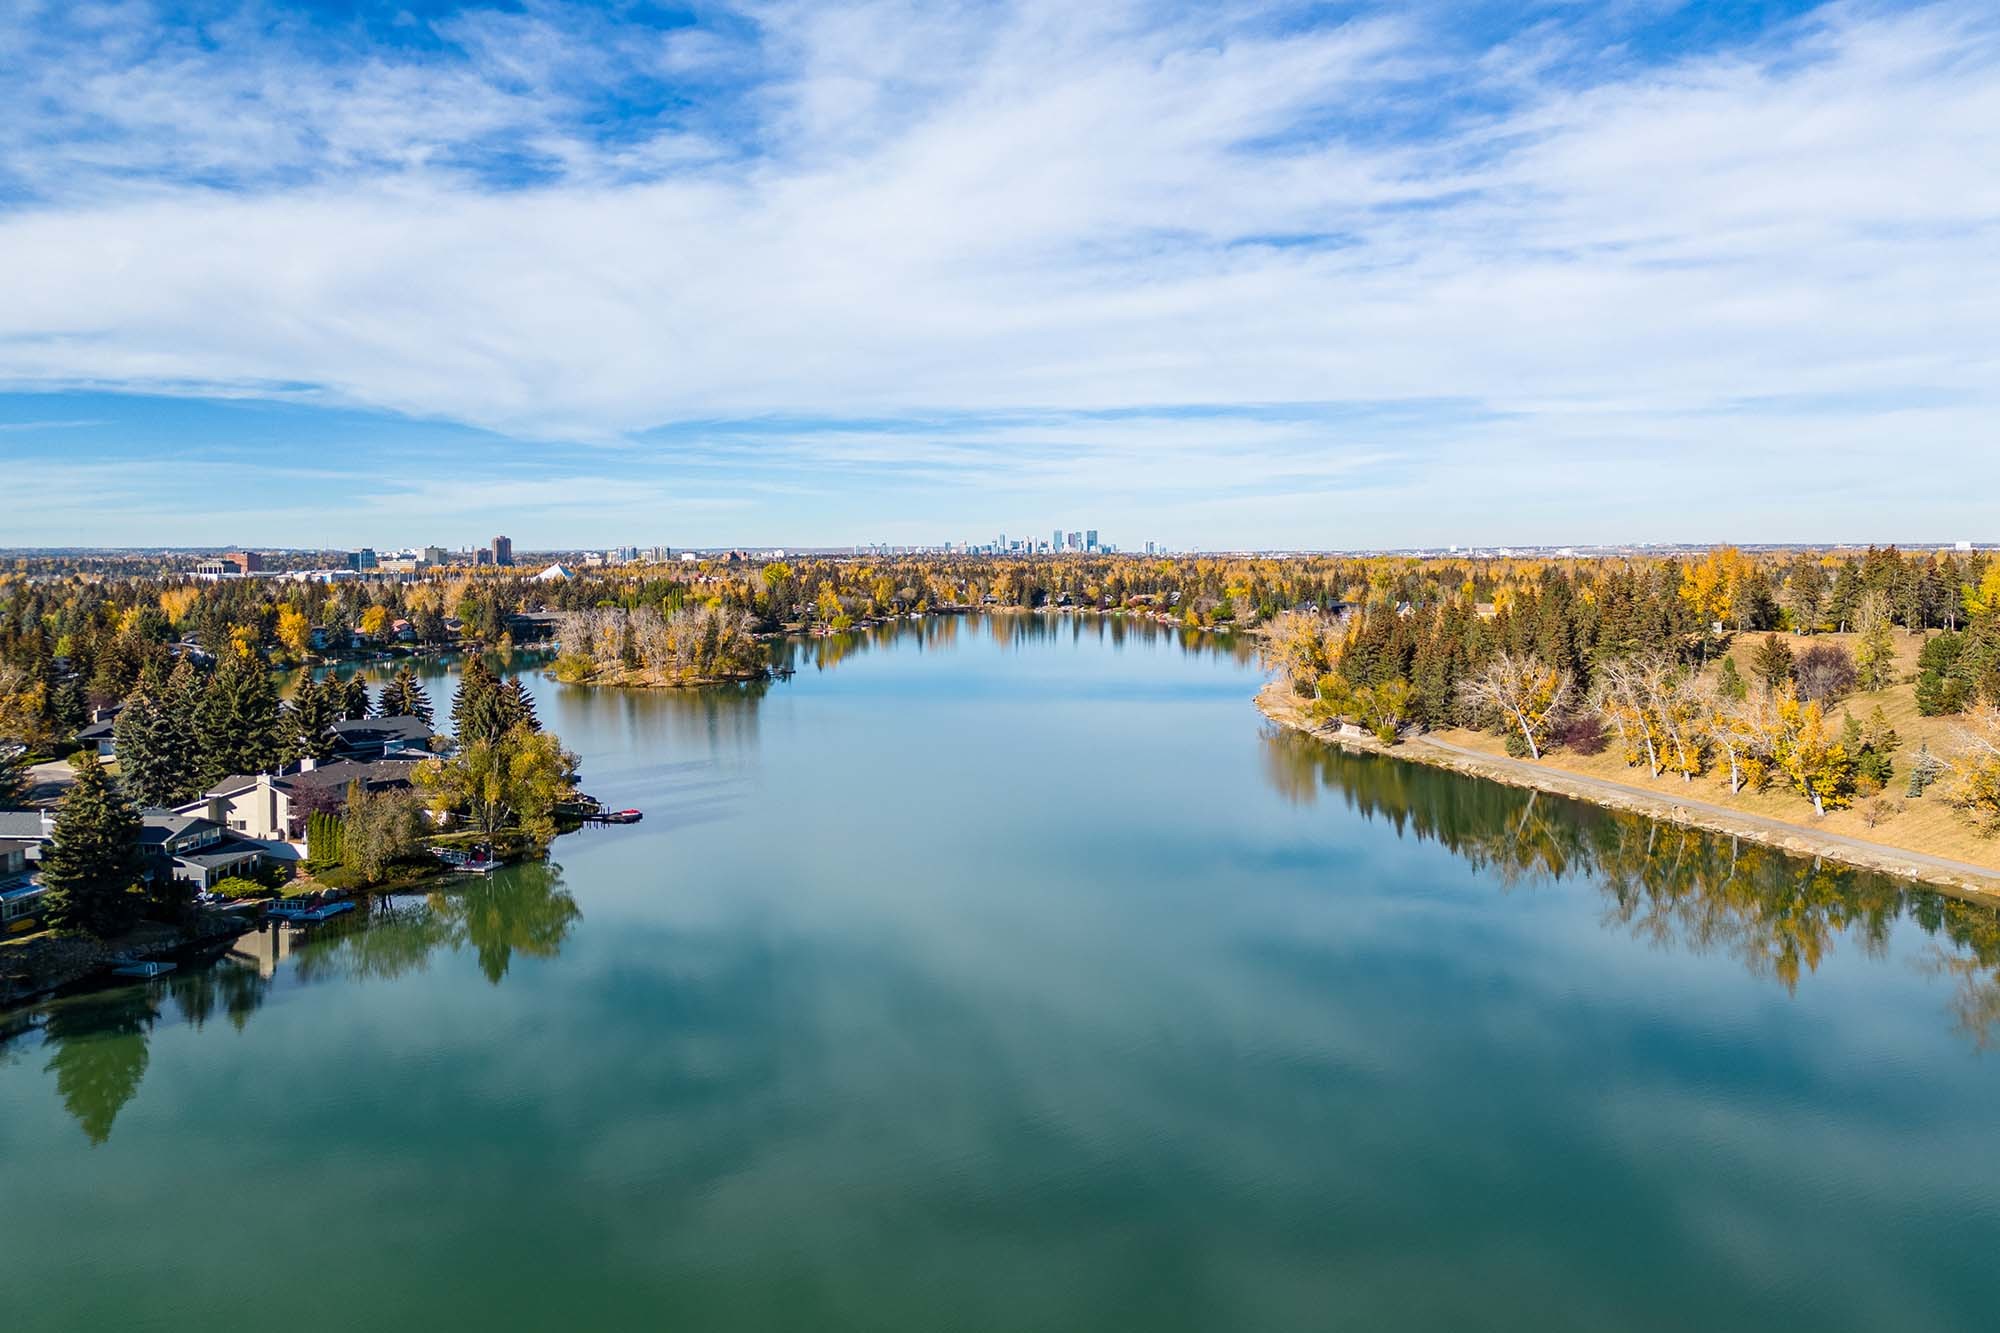 A view overlooking the water of Lake Bonavista, Calgary, Alberta, Canada with waterfront lake homes for sale and the Downtown Calgary skyline in the background.